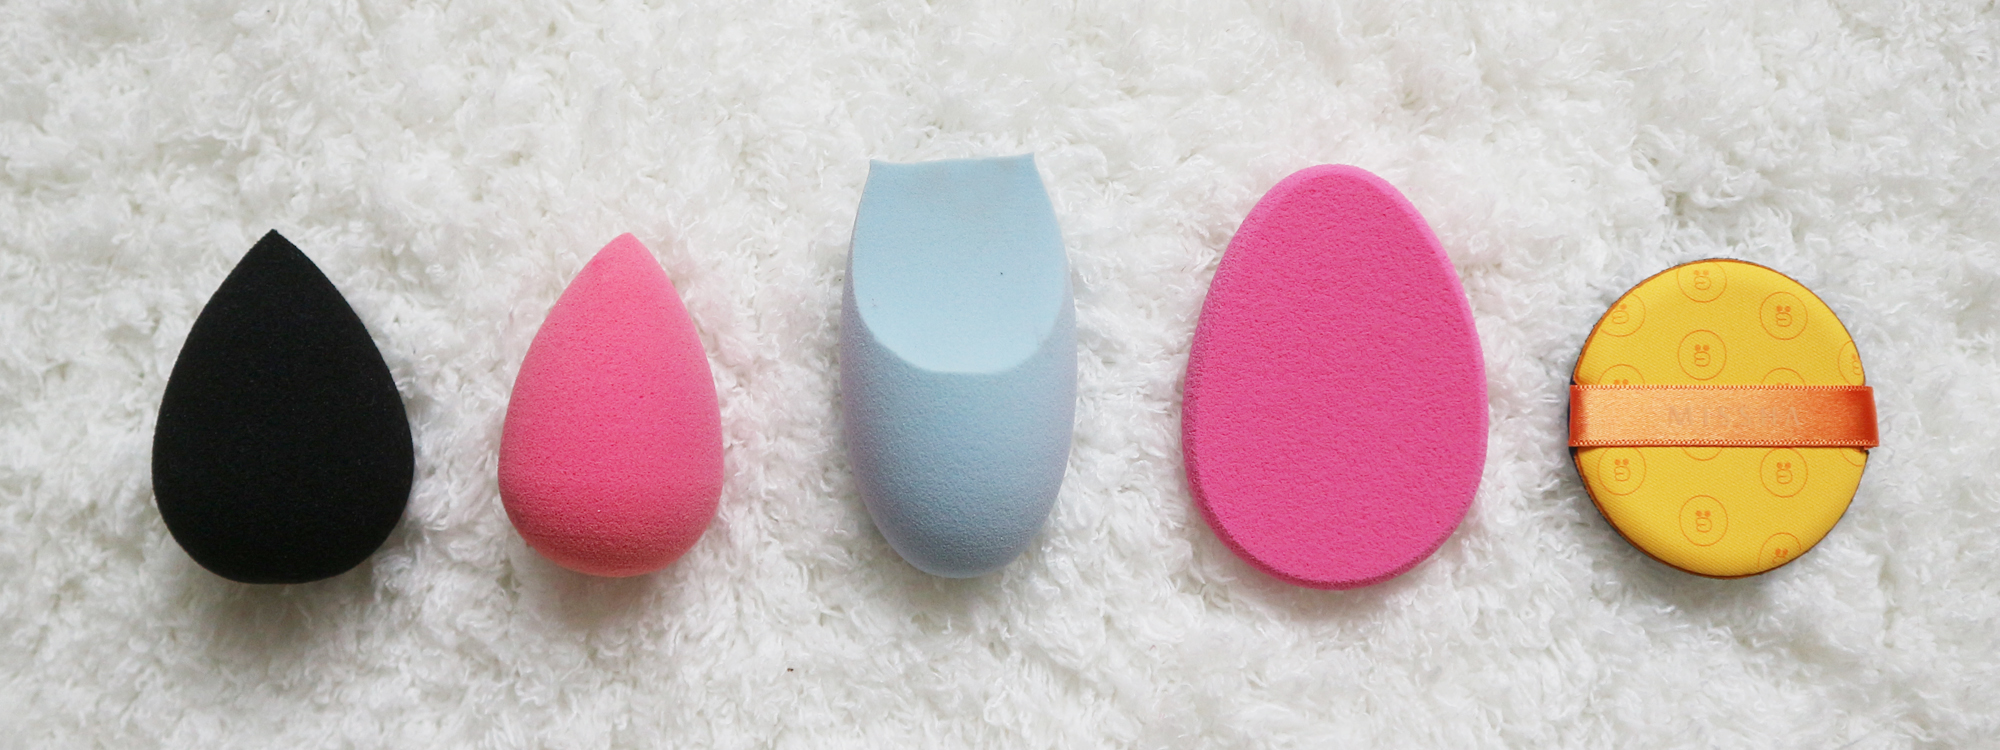 If you can't decide between your Silisponge and BeautyBlender